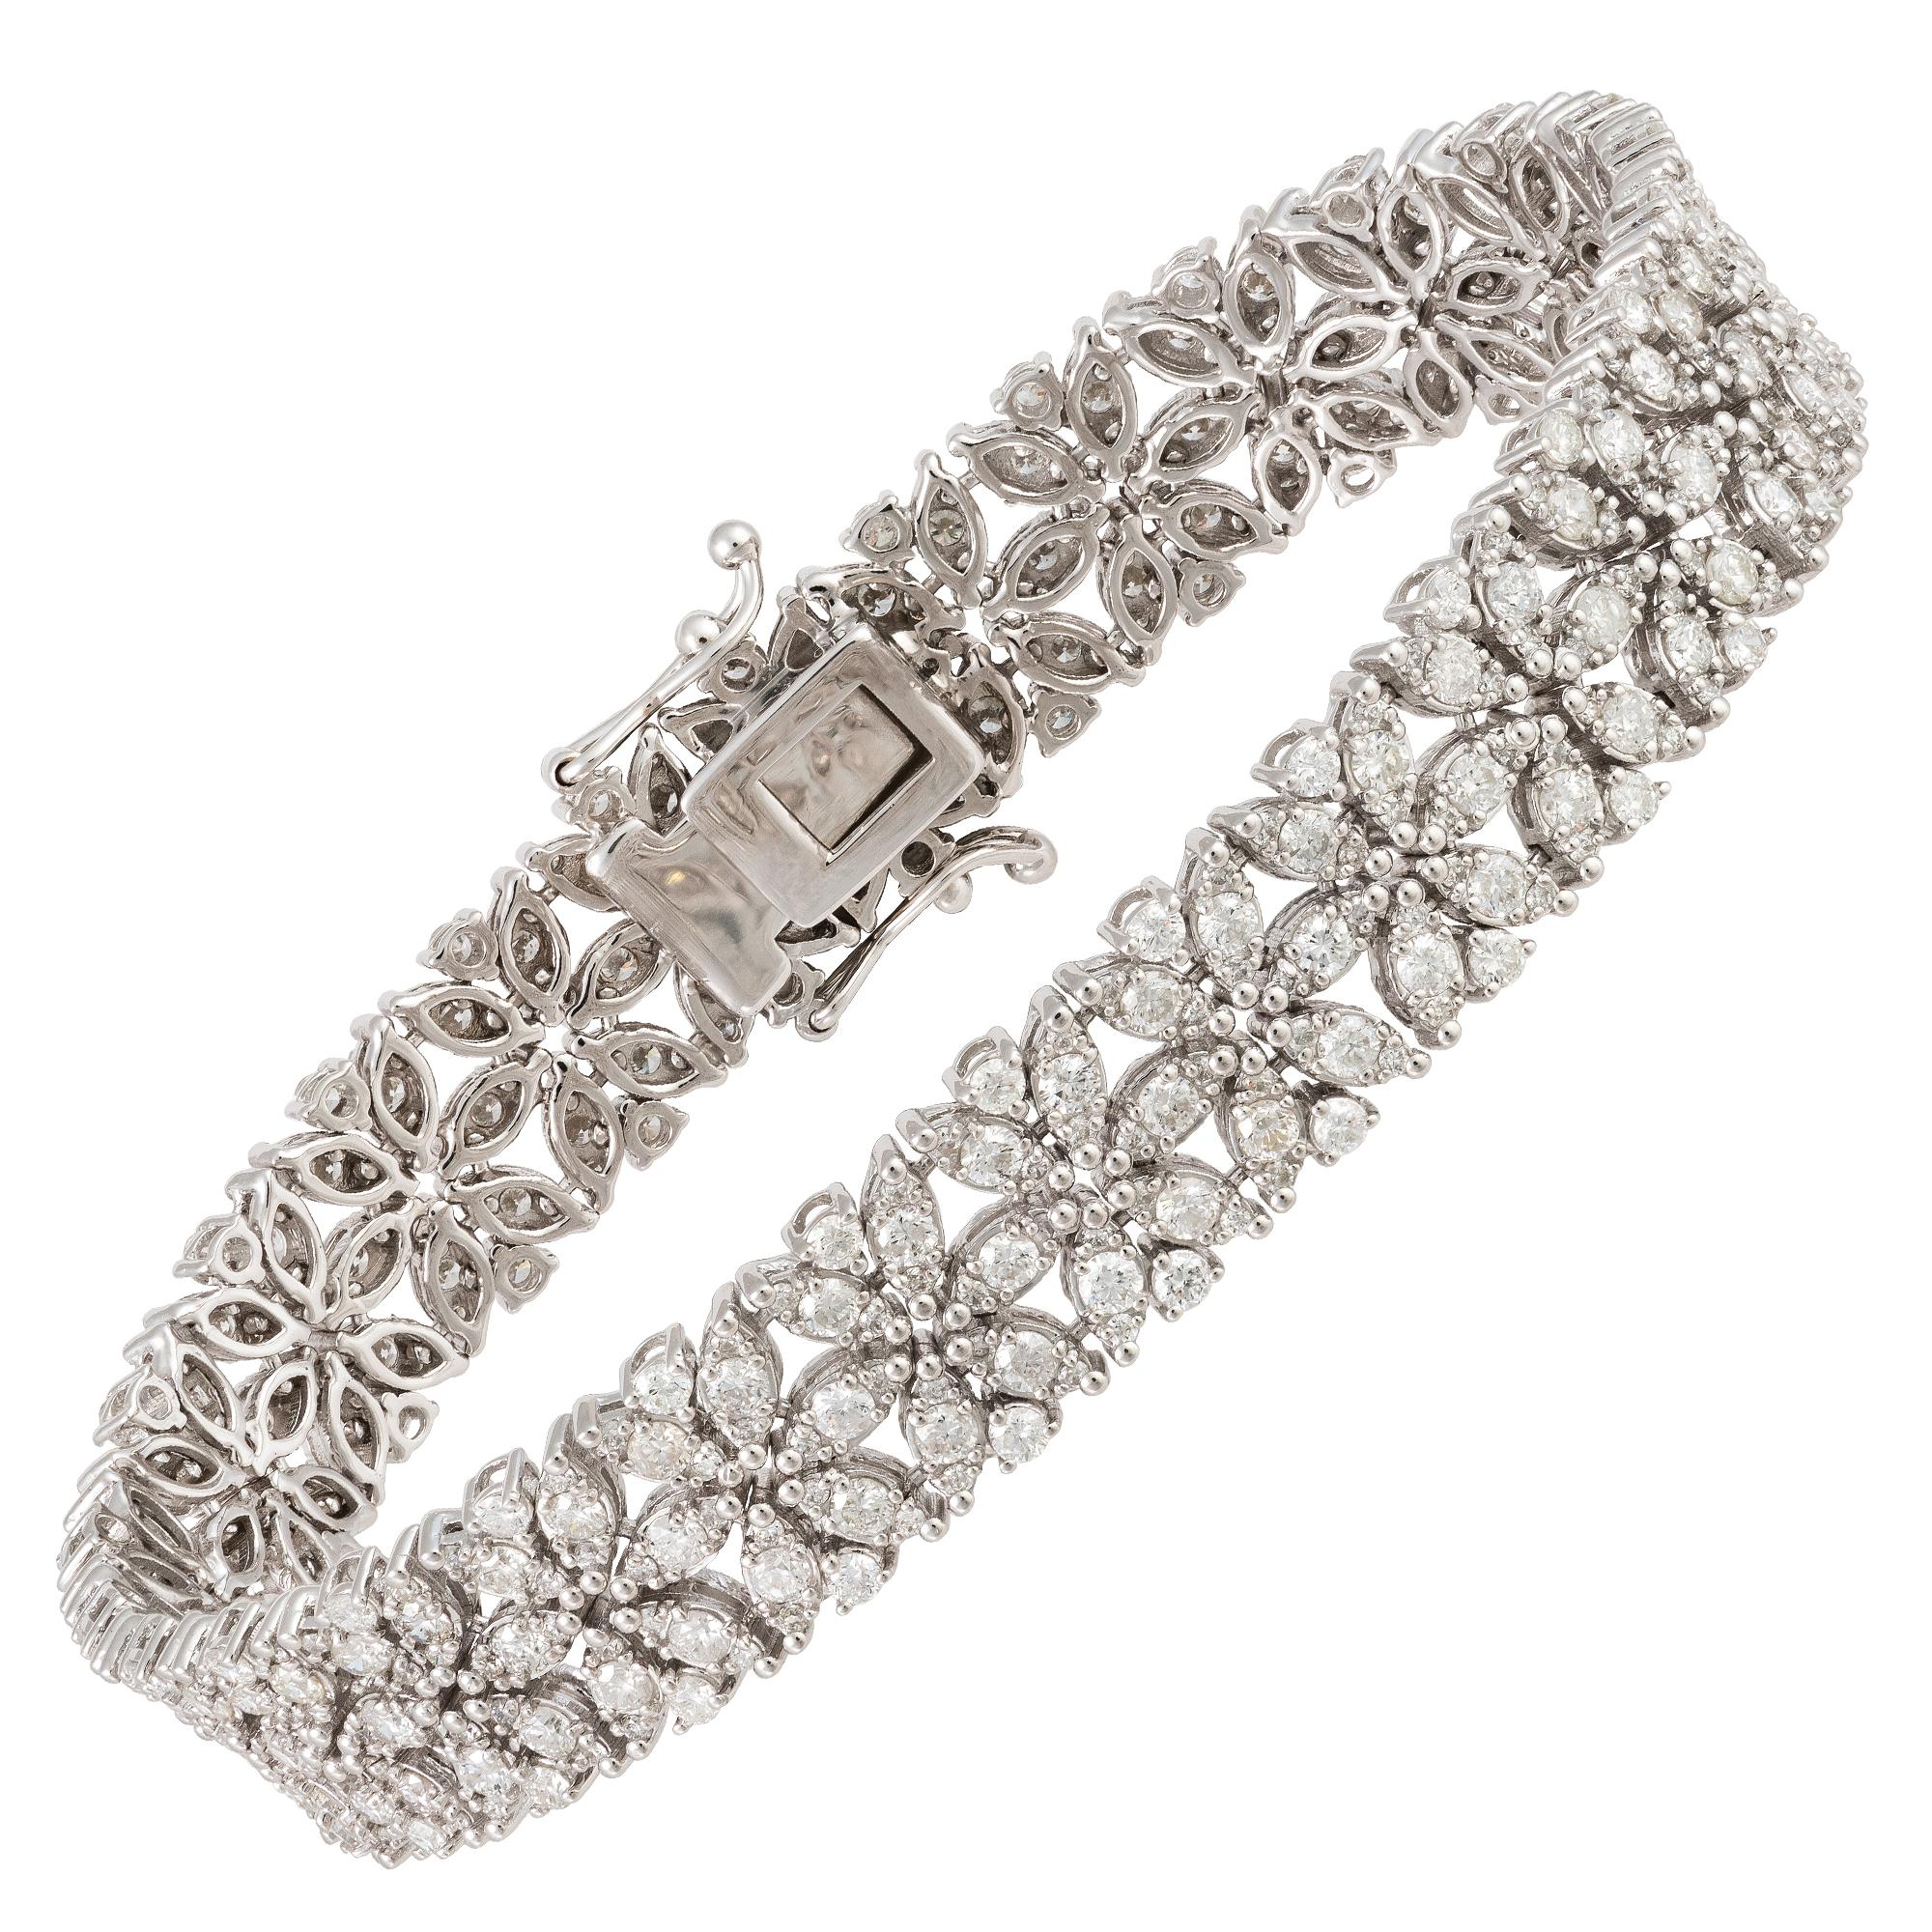 The Following Item we are offering is a Rare Magnificent Radiant 18KT Gold Large Rare Gorgeous Fancy Diamond Bracelet. Bracelet is comprised of Beautiful Glittering Gorgeous Diamonds!!! T.C.W. Approx 5.50CTS!!! This Gorgeous Bangle is a Rare Sample